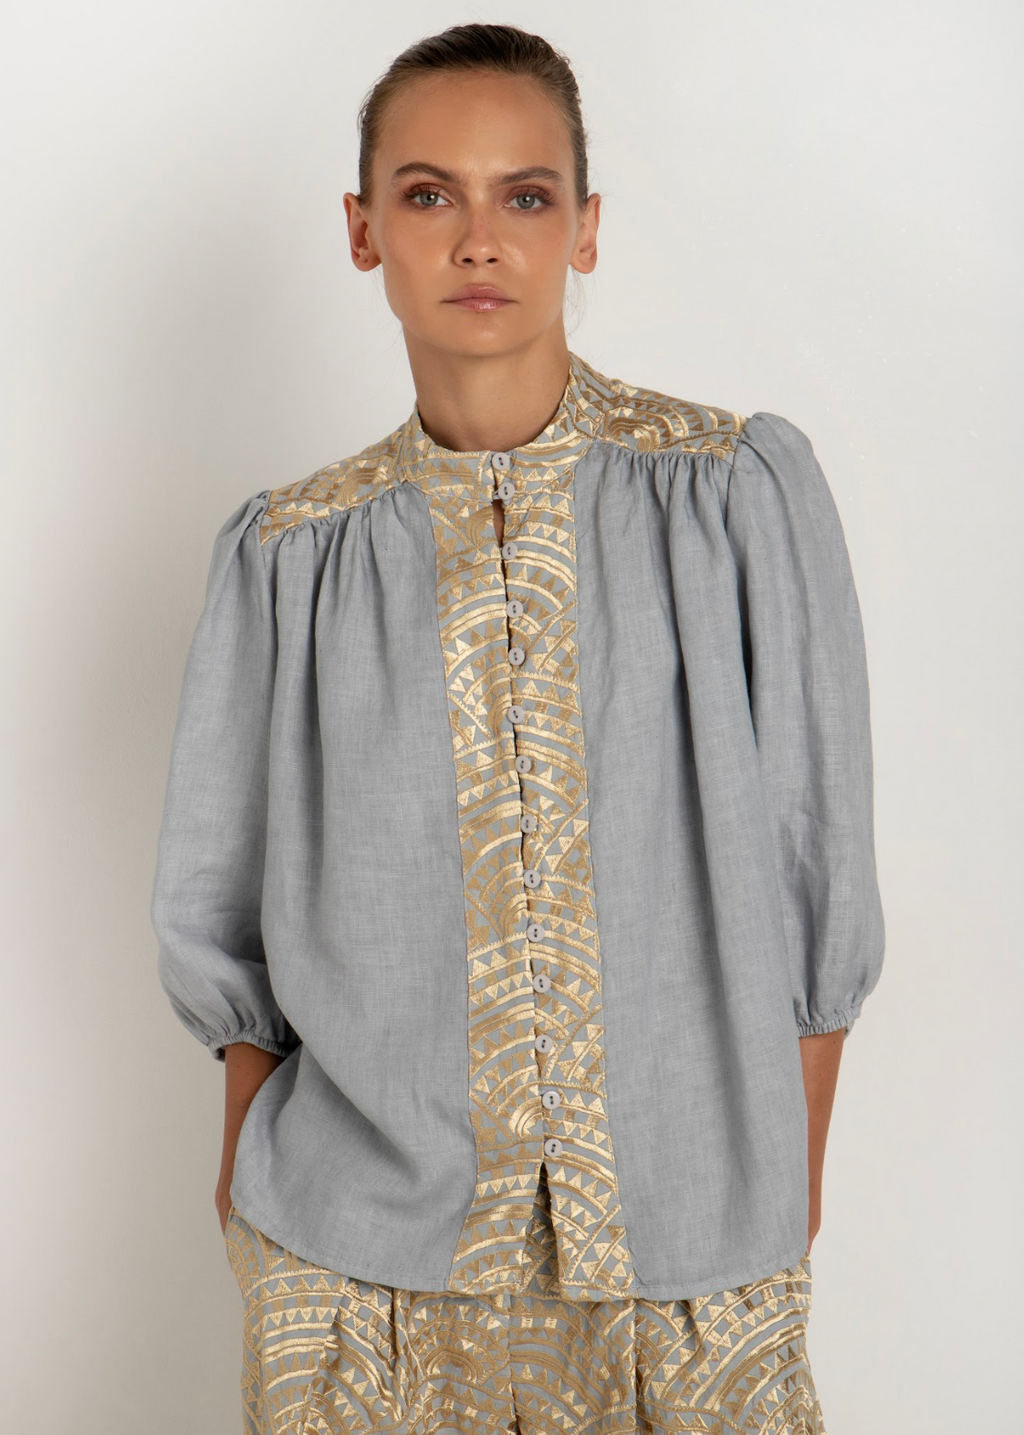 New Triangle Blouse in Light Grey/Gold